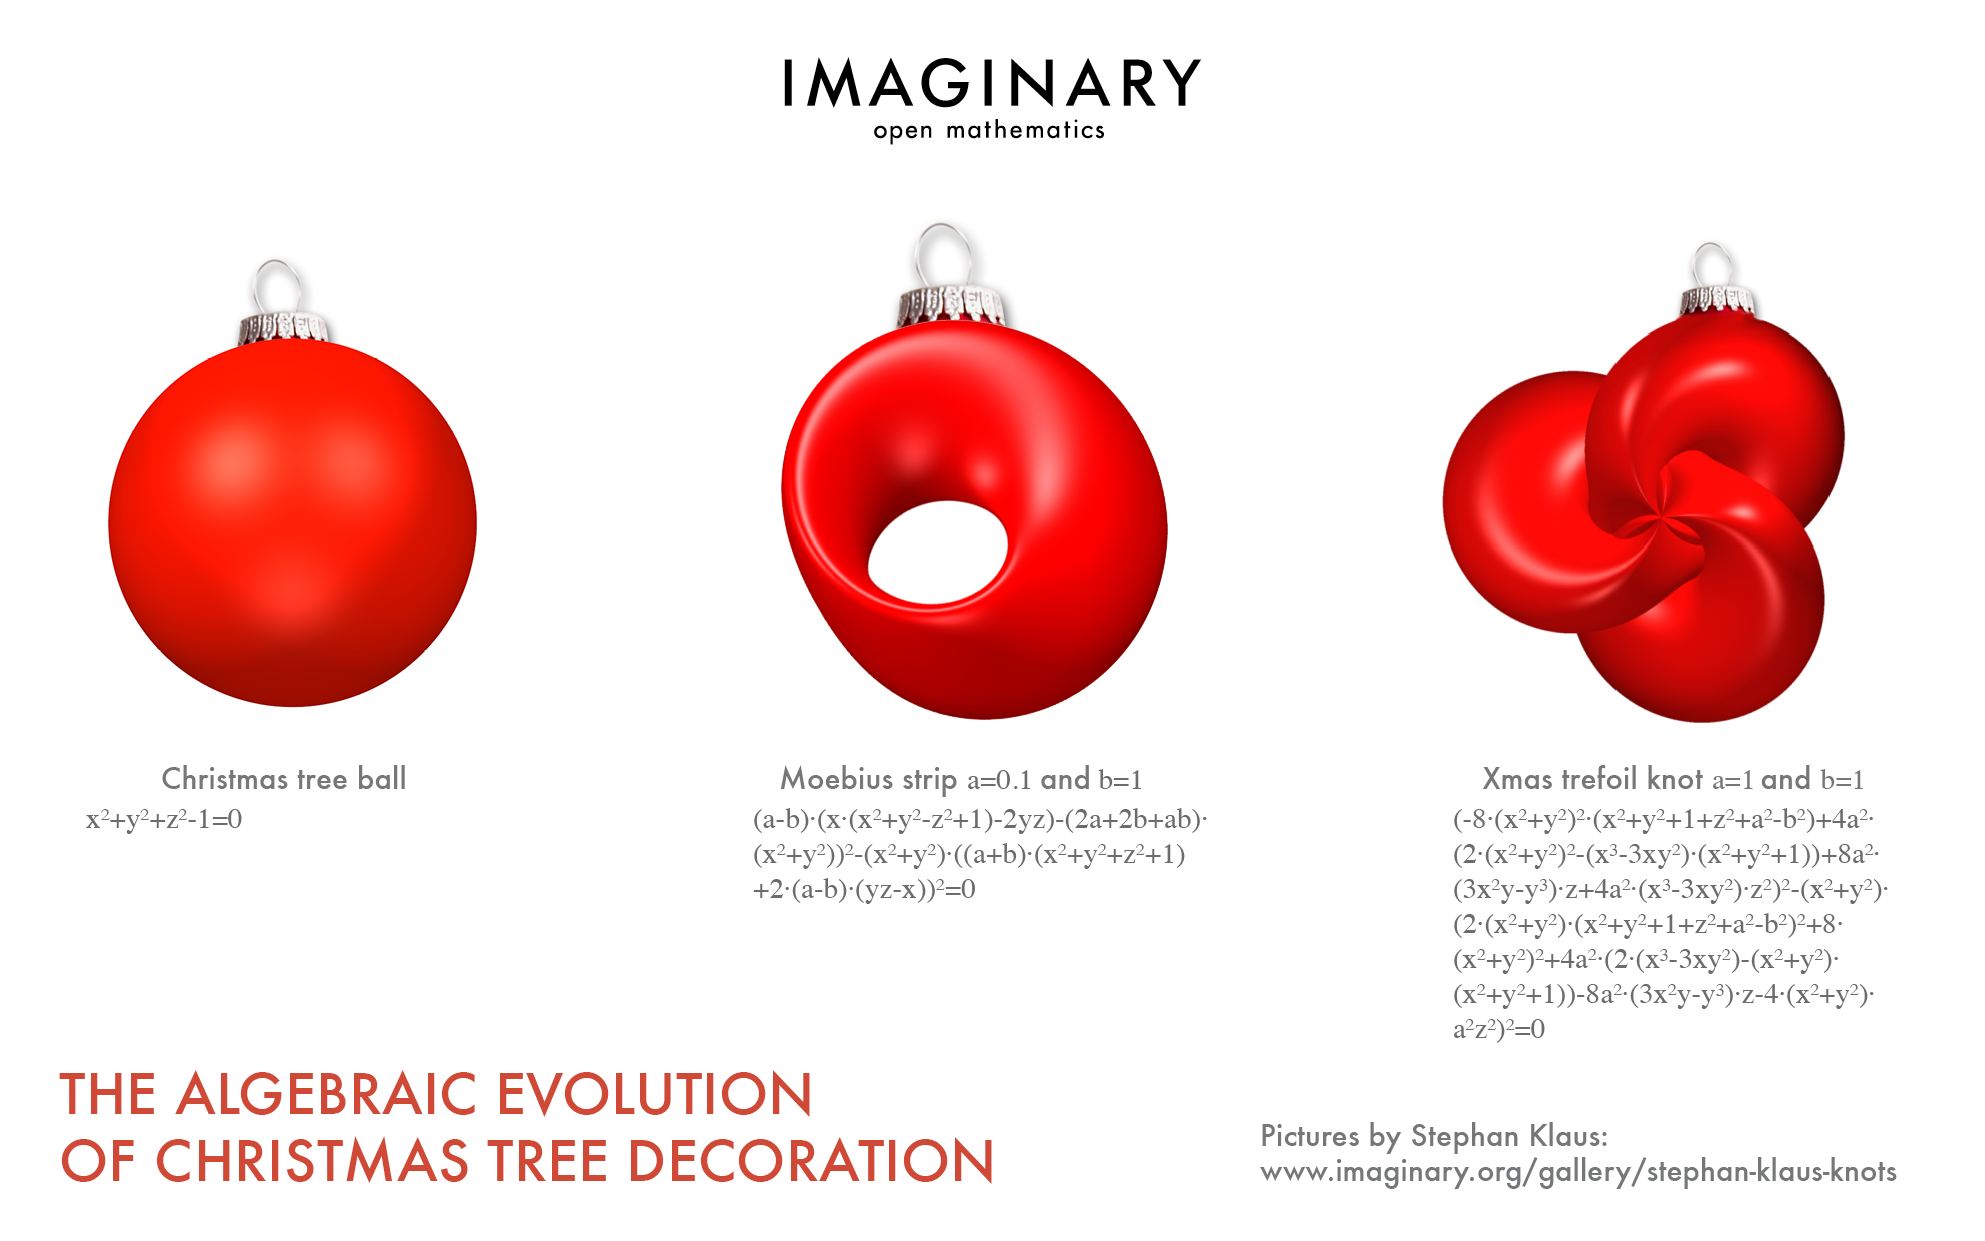 The Evolution of Christmas Tree Decoration and a Happy New 